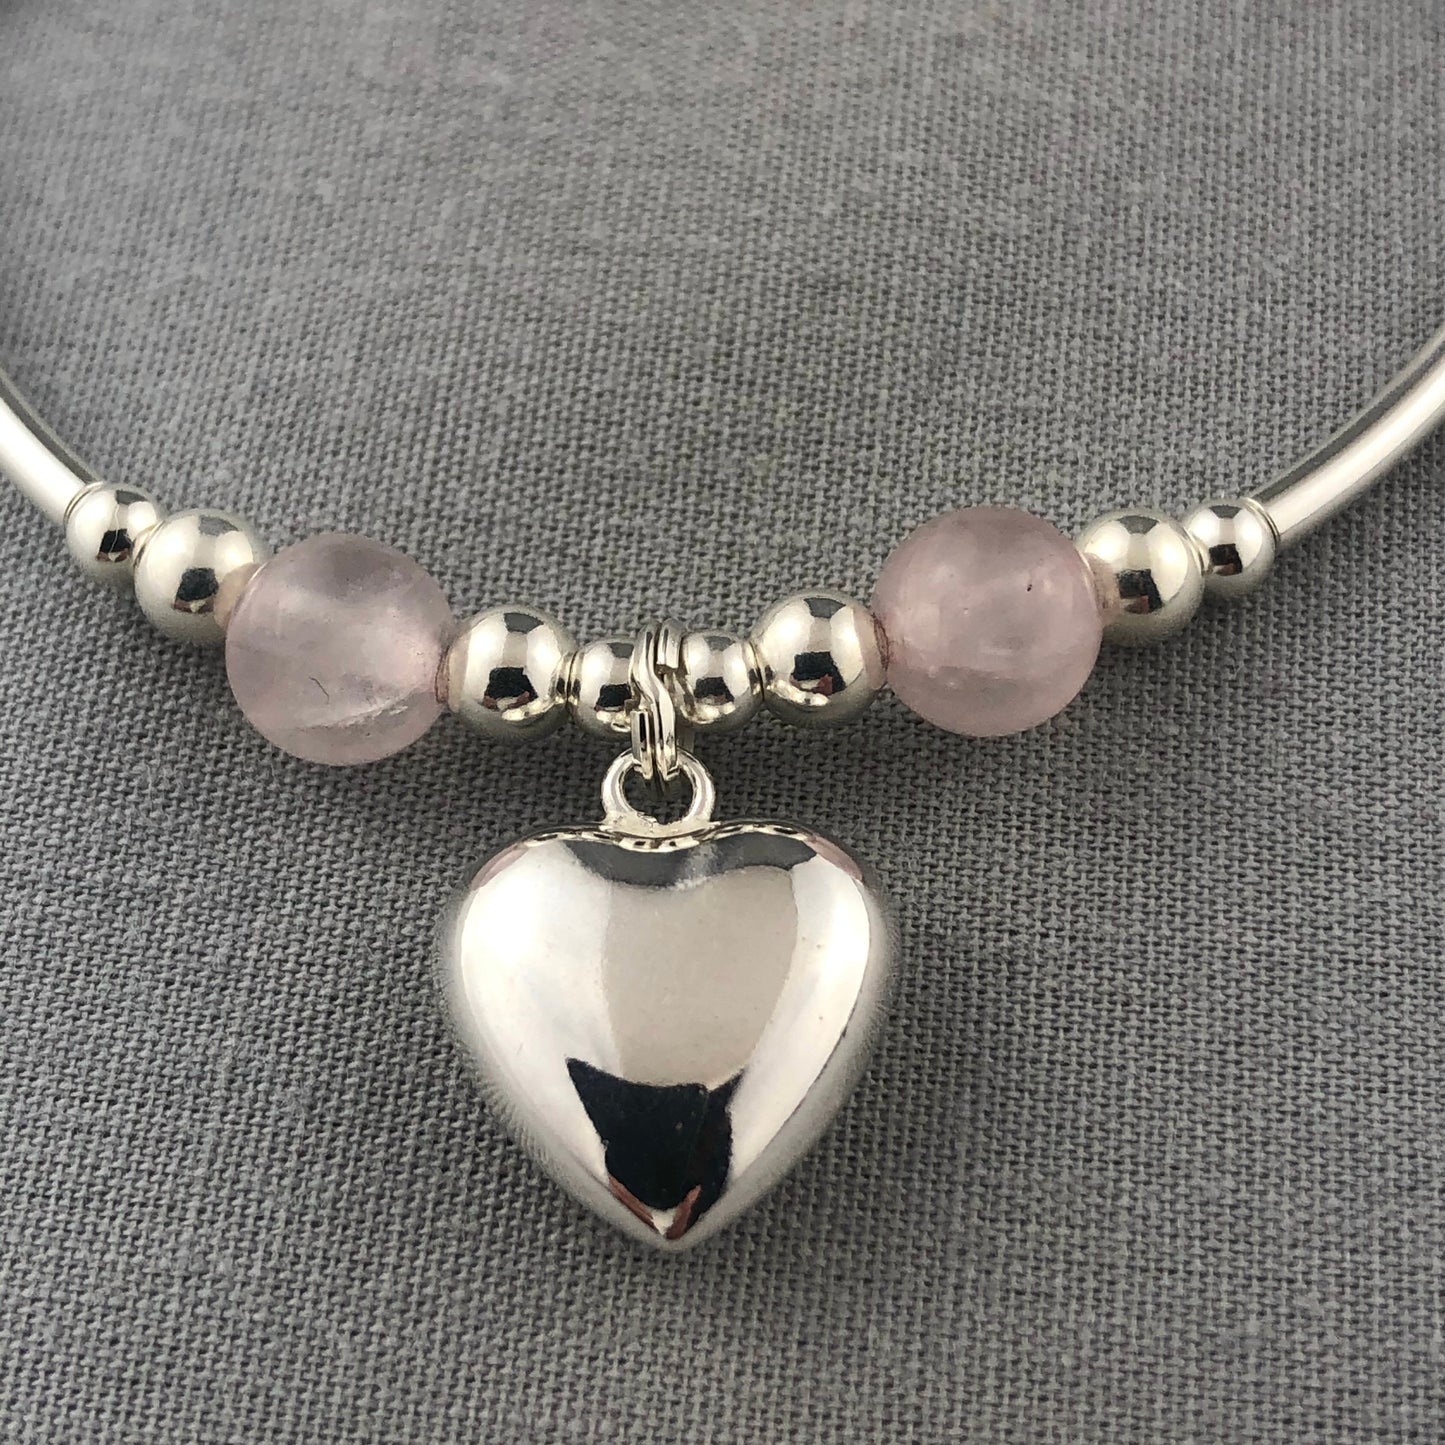 Puff heart rose quartz & sterling silver stacking charm bracelet by My Silver Wish